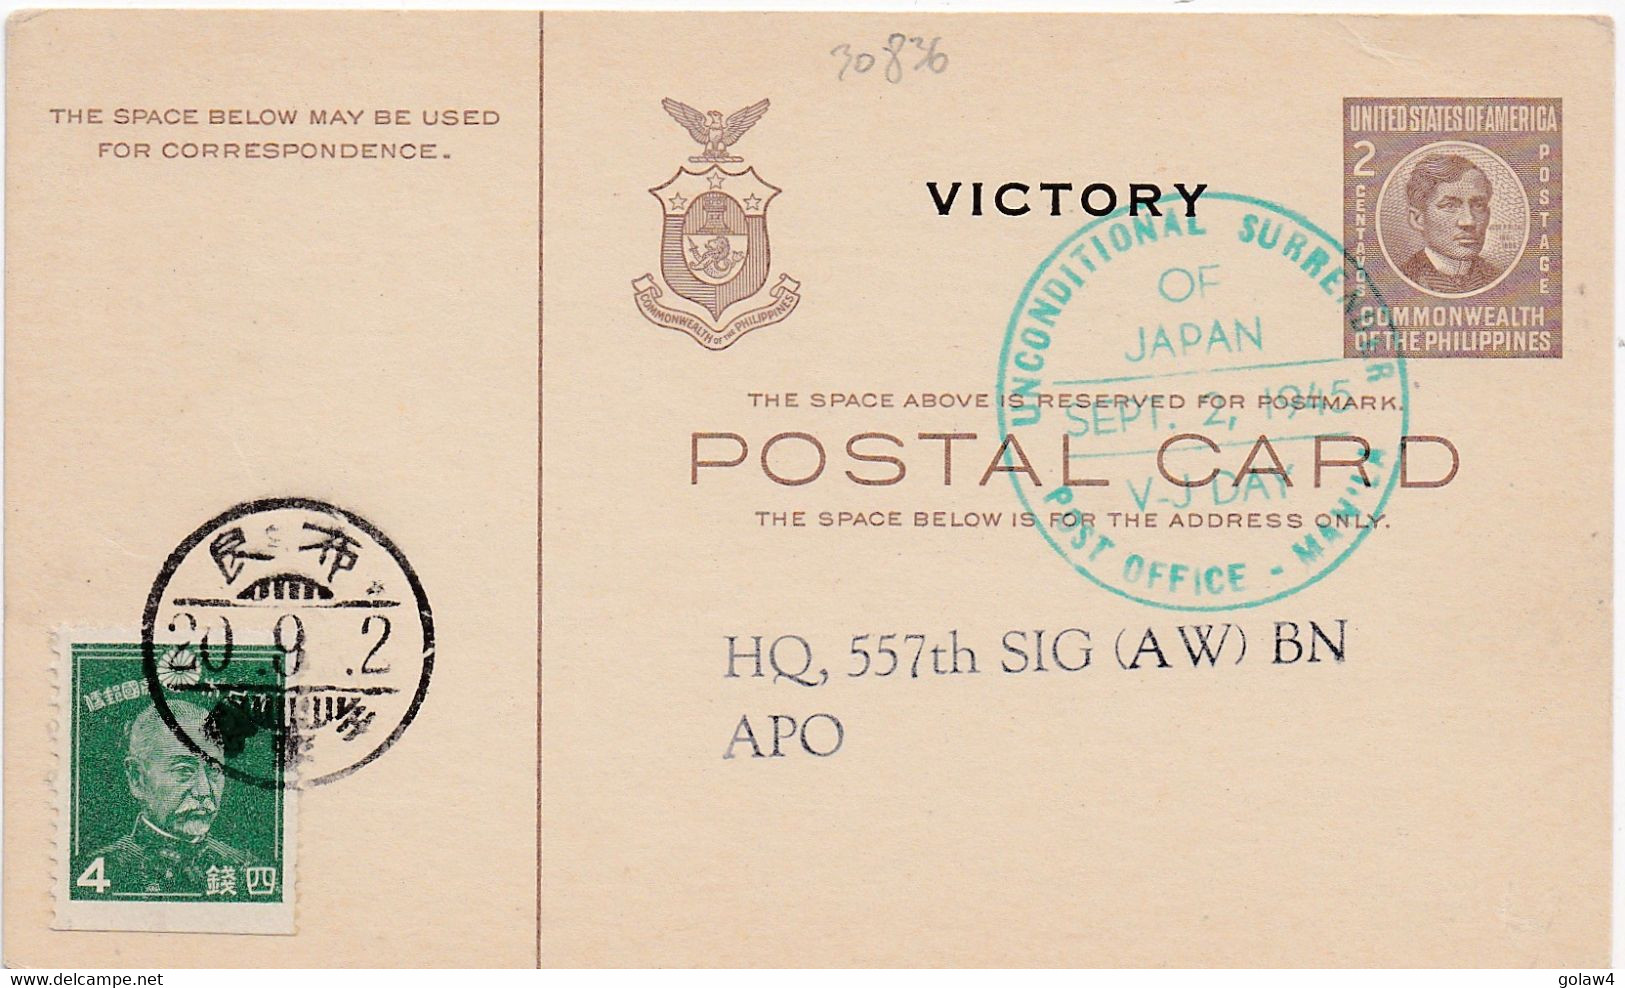 30836# ENTIER POSTAL COMMENWEALTH PHILIPPINES VICTORY UNCONDITIONAL SURRENDER OF JAPAN SEPT 2 1945 STATIONERY GANZSACHE - Philippinen